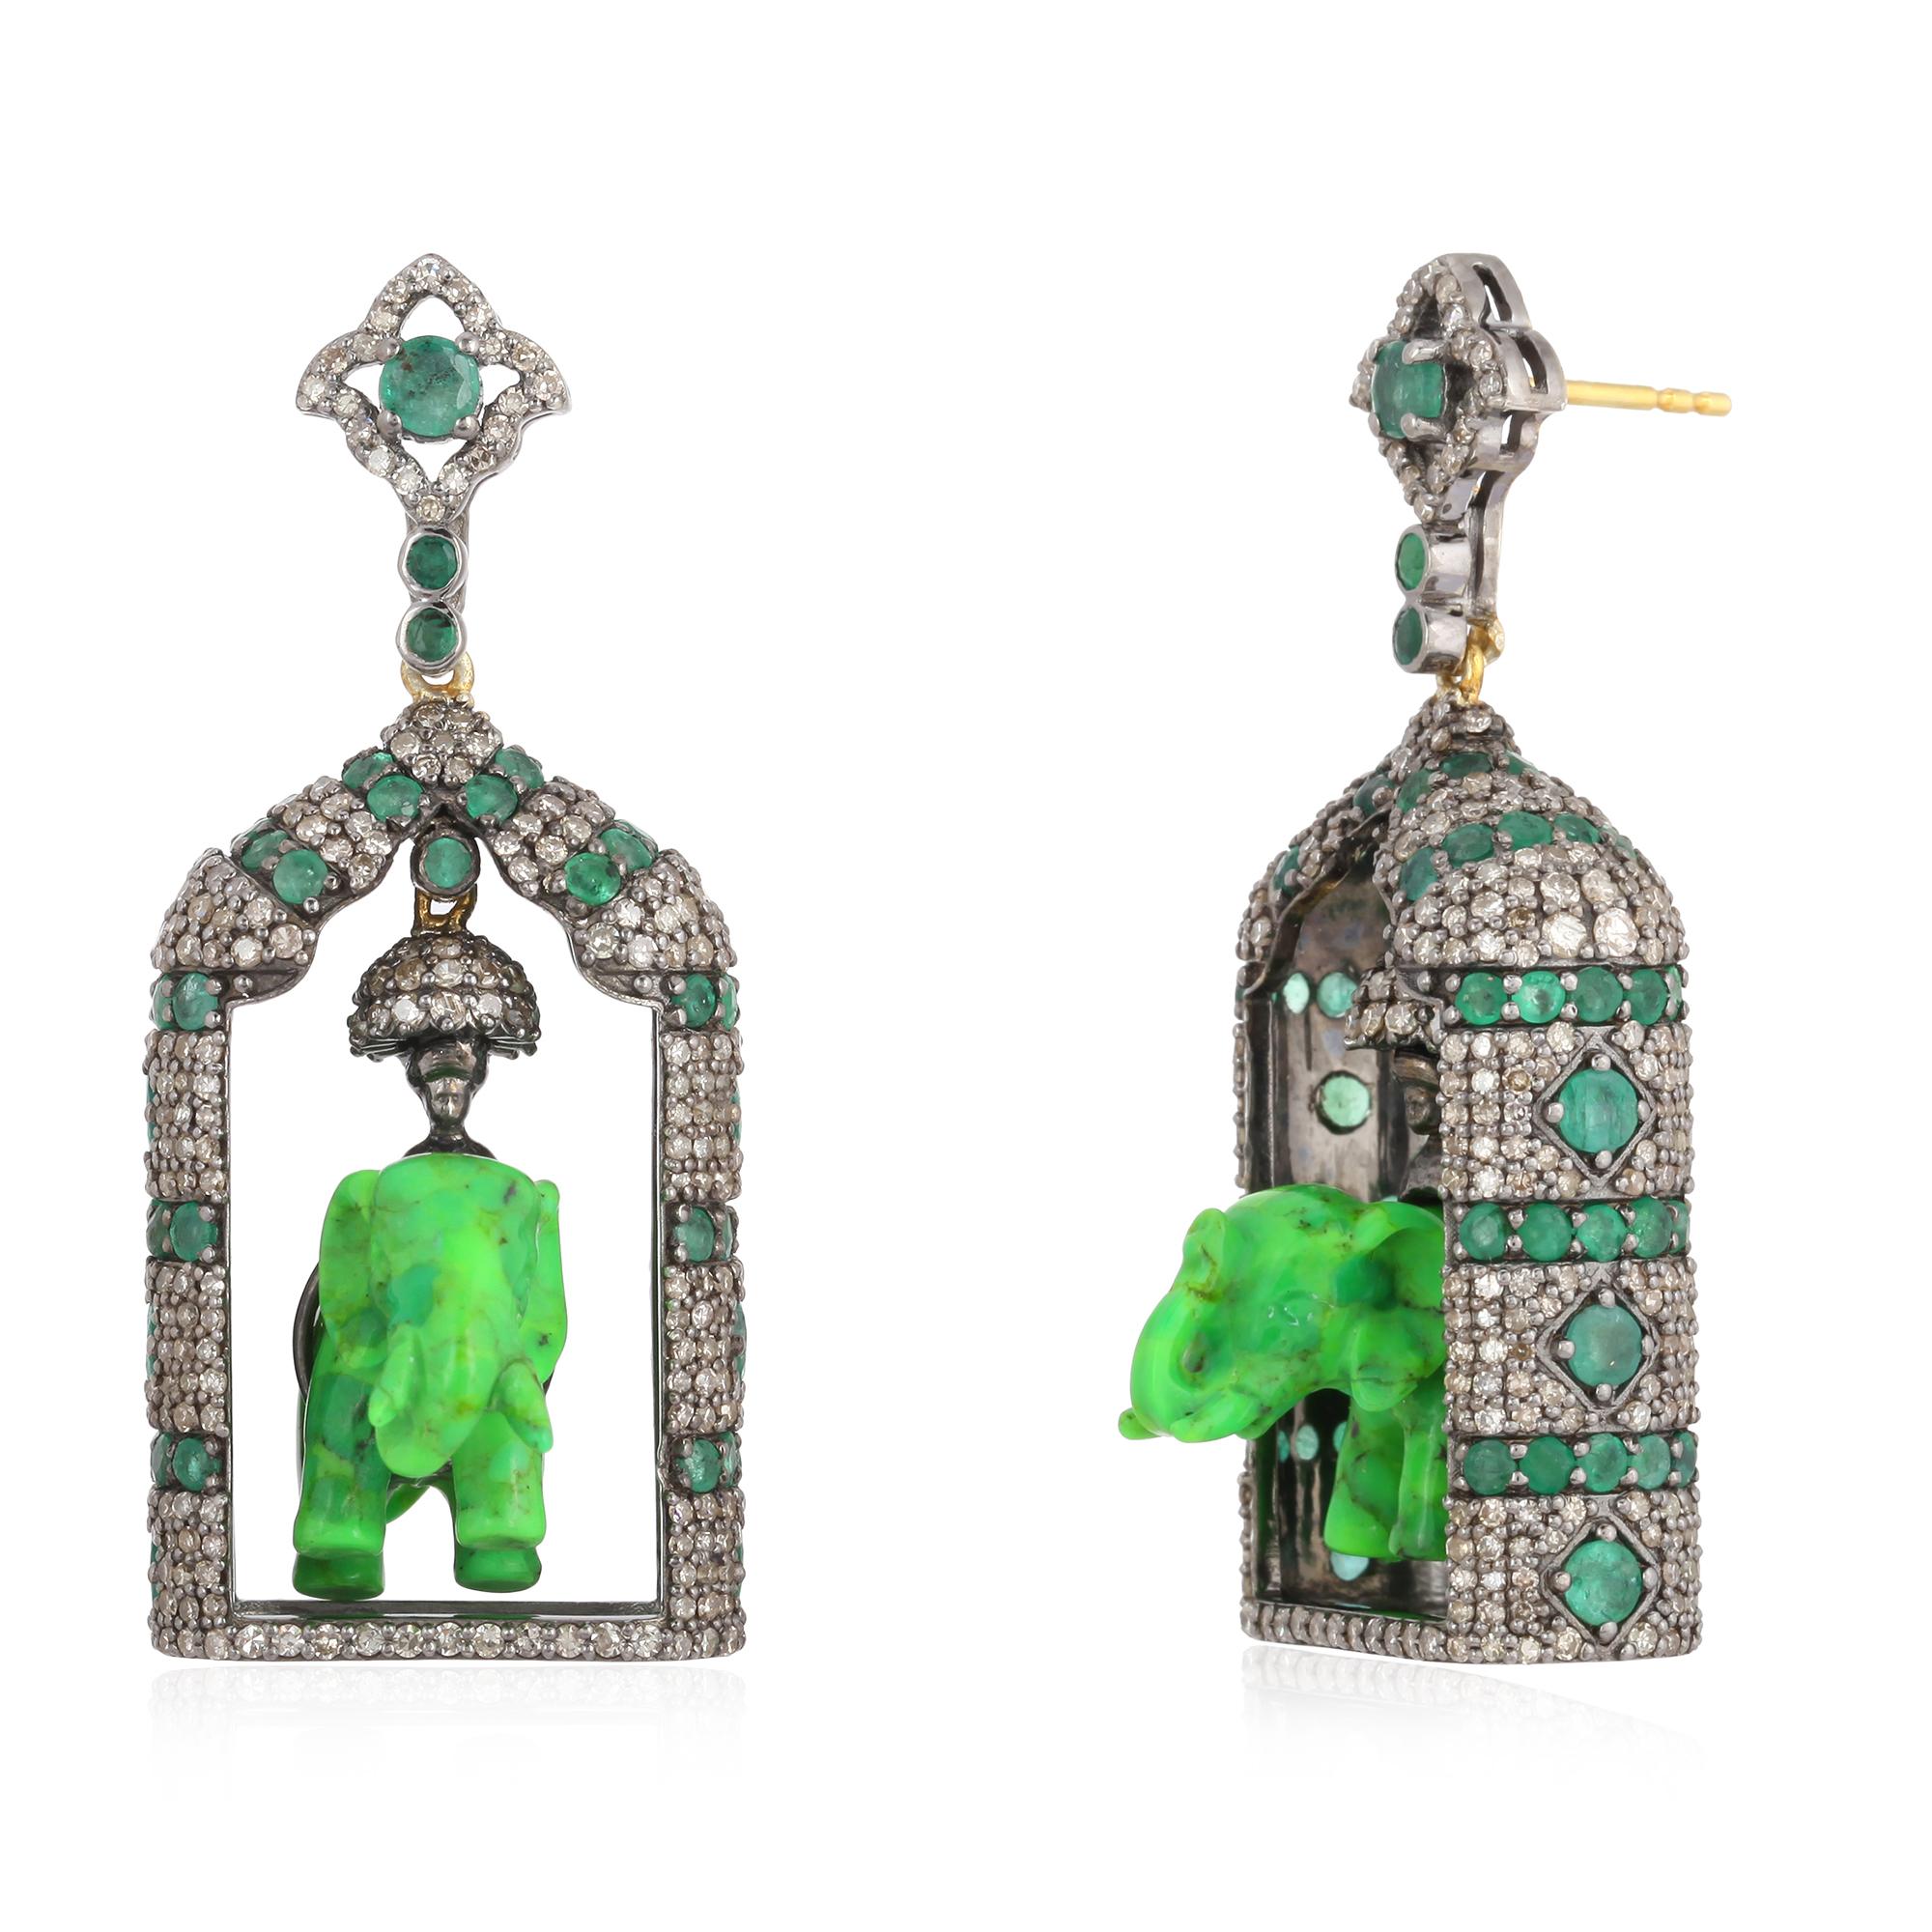 Mixed Cut Carved Turquoise Emerald Diamond Elephant Earrings